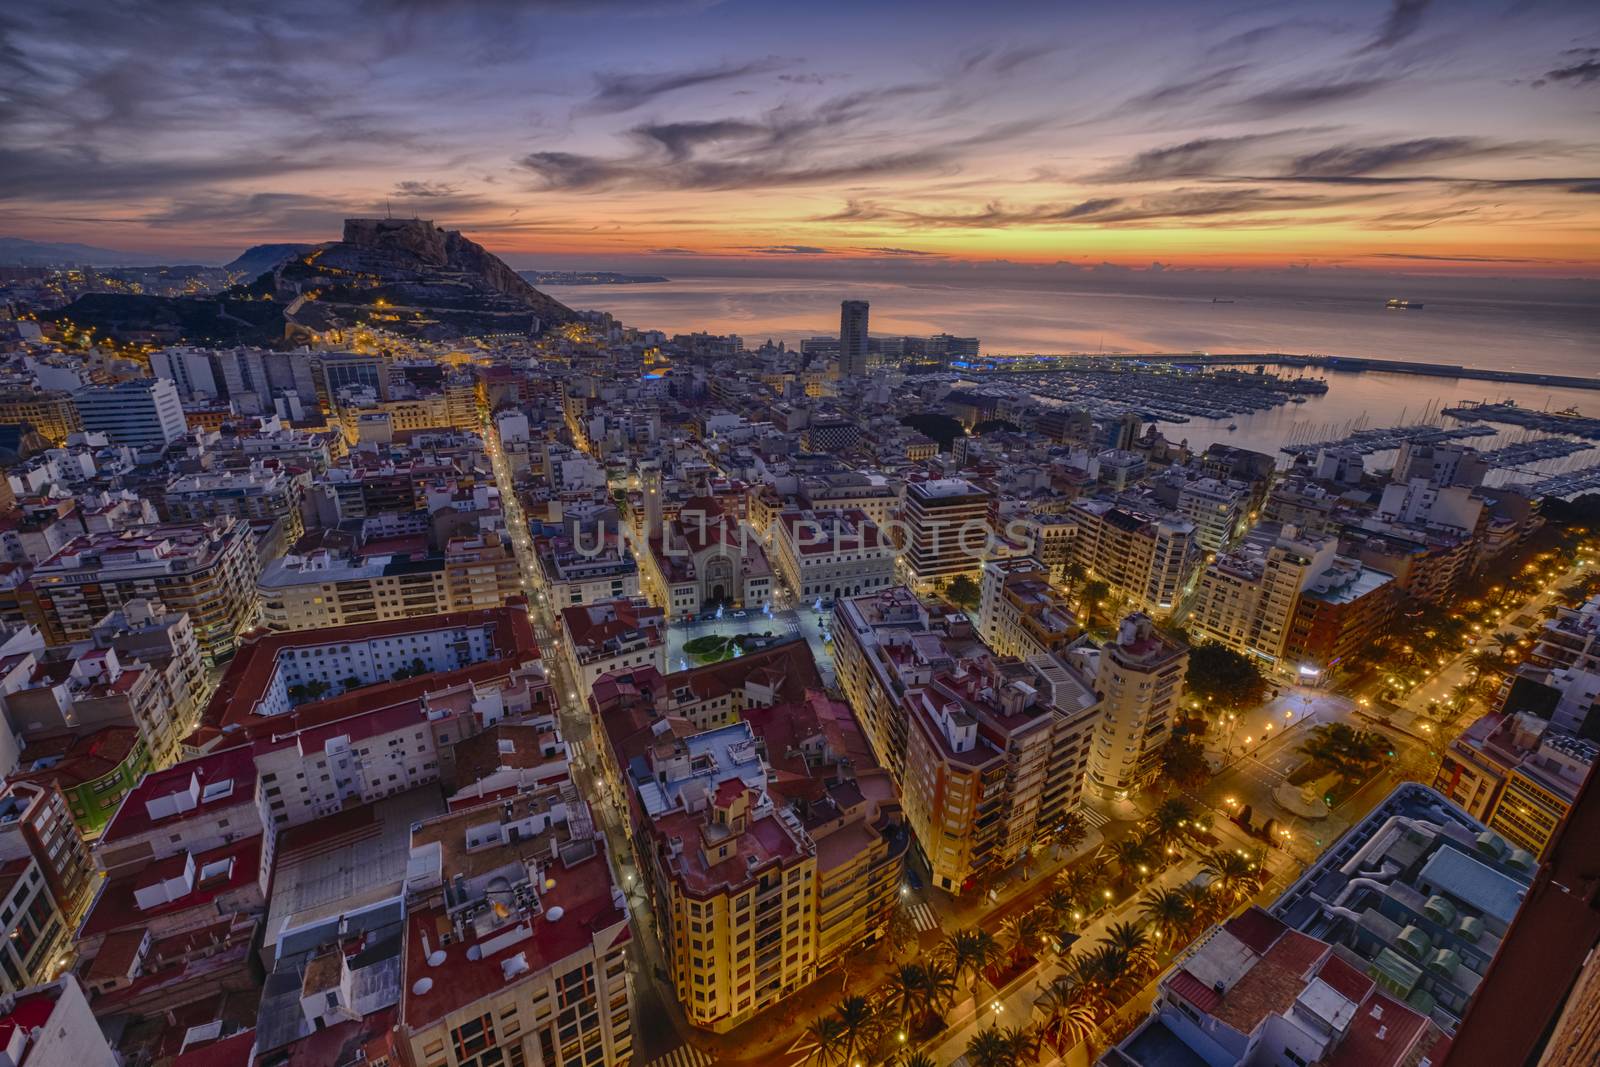 sunrise over the ancient city of Alicante in Spain and in the background the castle and harbor